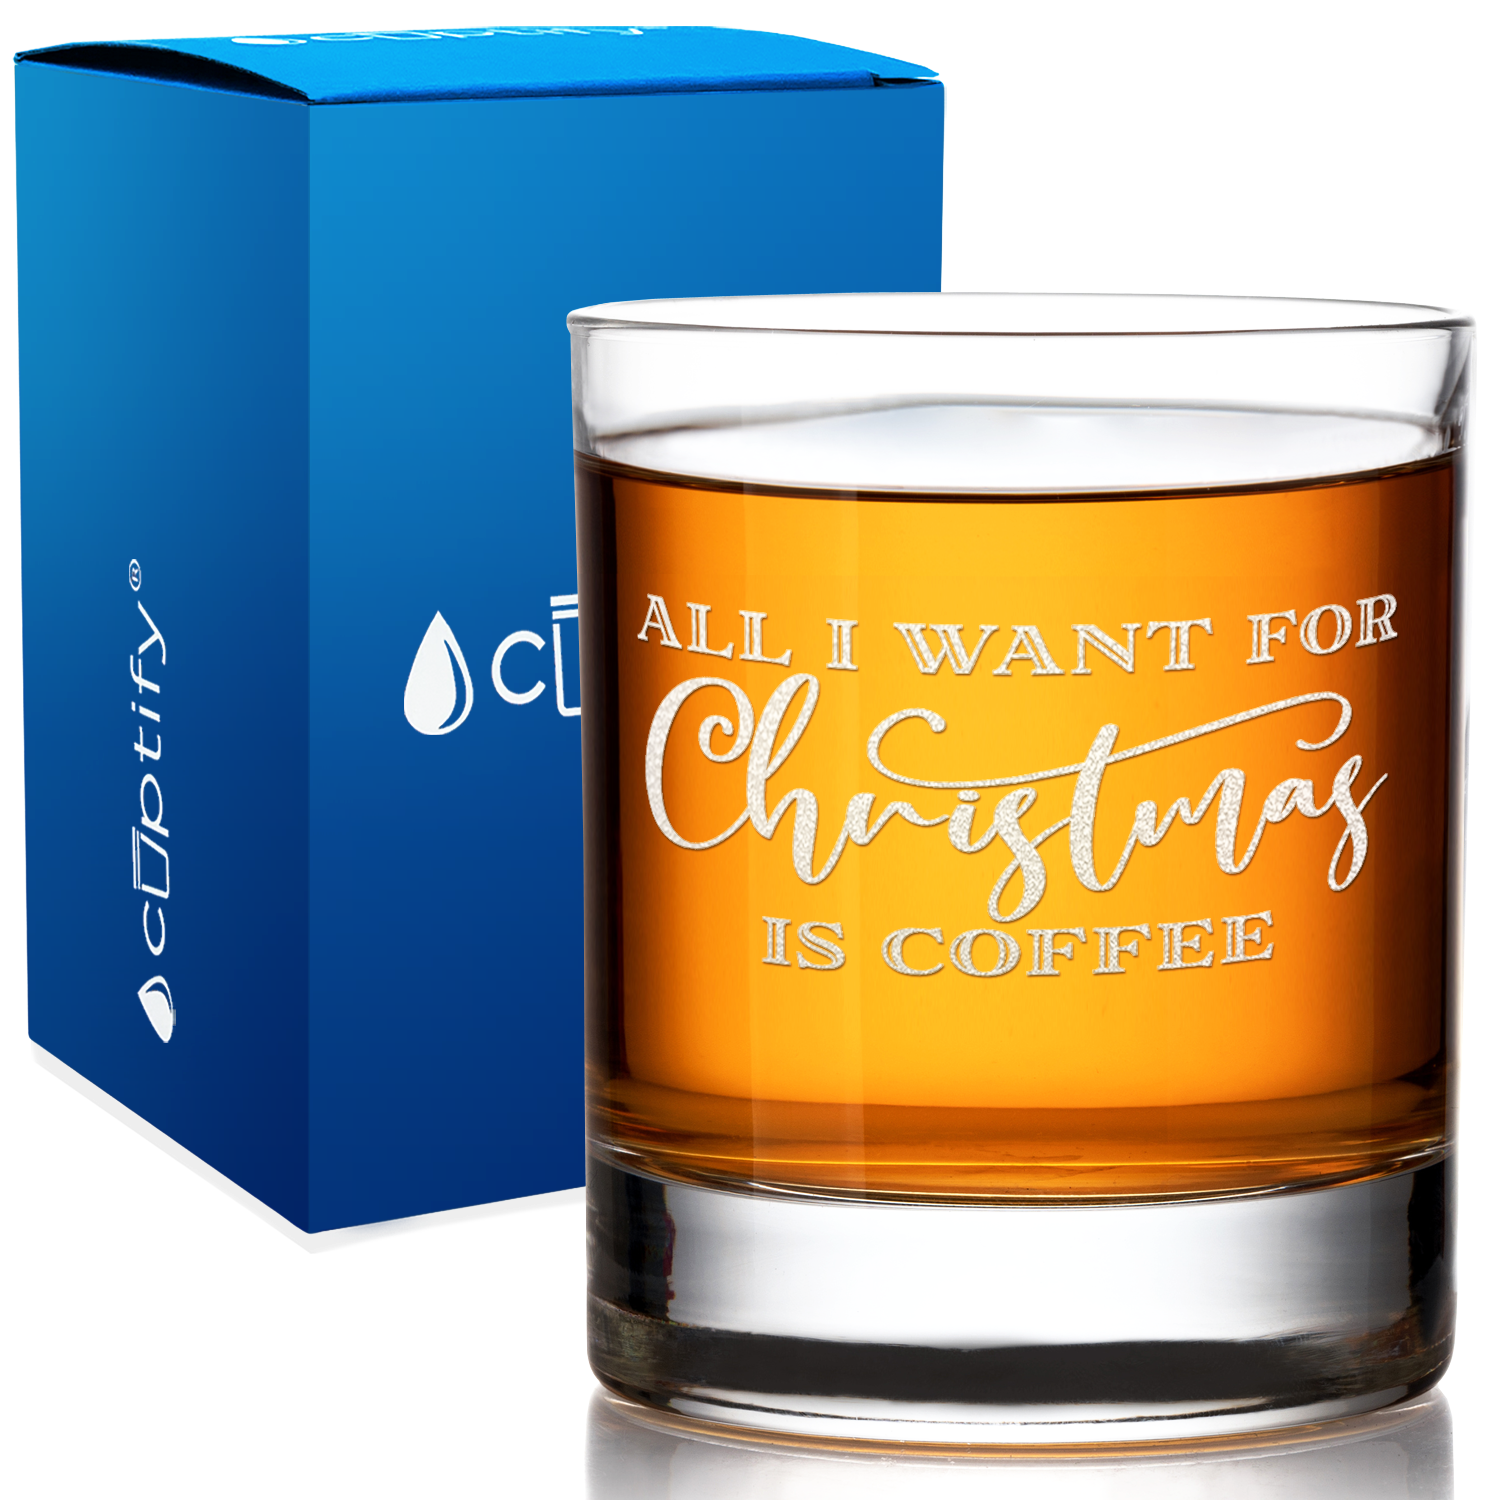 All I want for Christmas is Coffee on 10.25oz Whiskey Glass